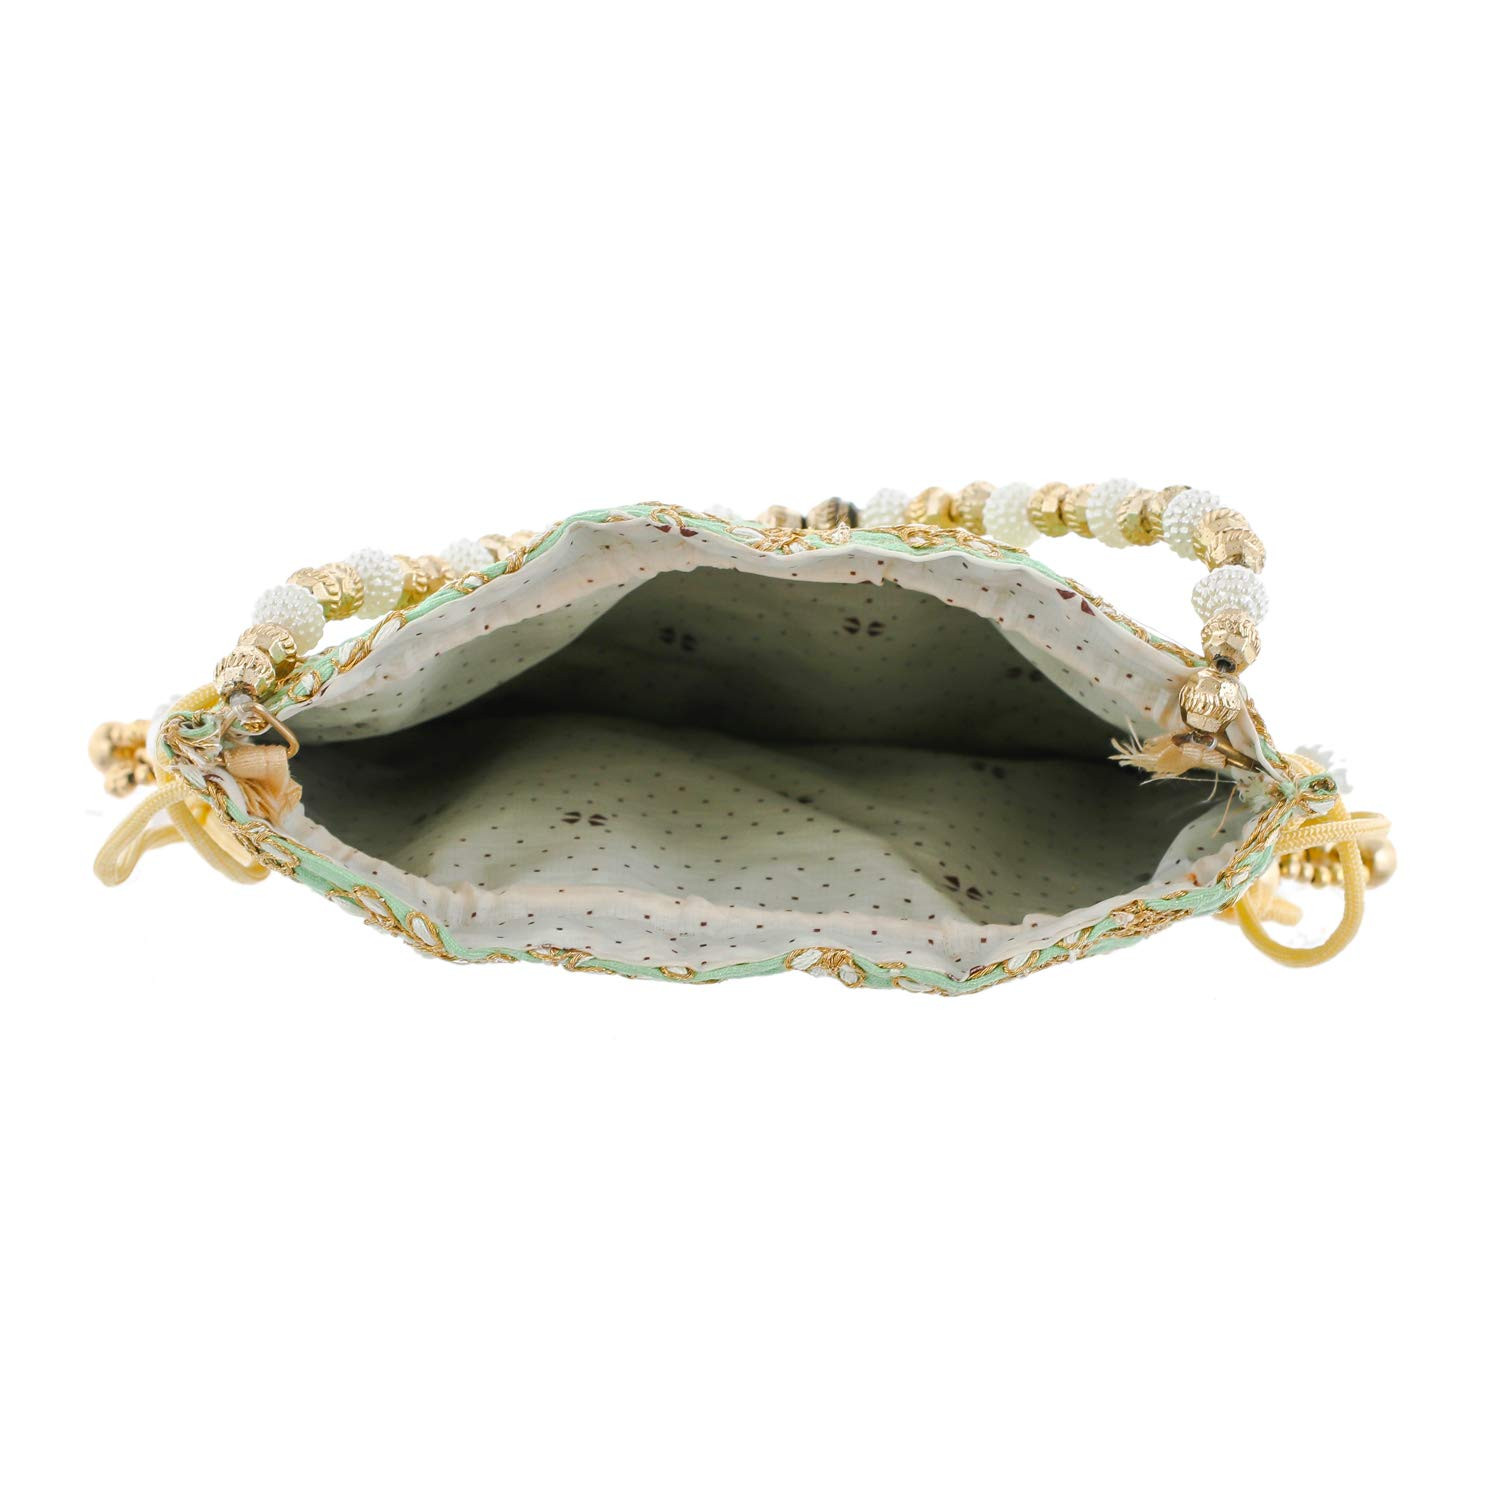 Kuber Industries Embroidery Drawstring Potli|Hand Purse With Gold Pearl Border & Handle For Woman,Girls (Green)